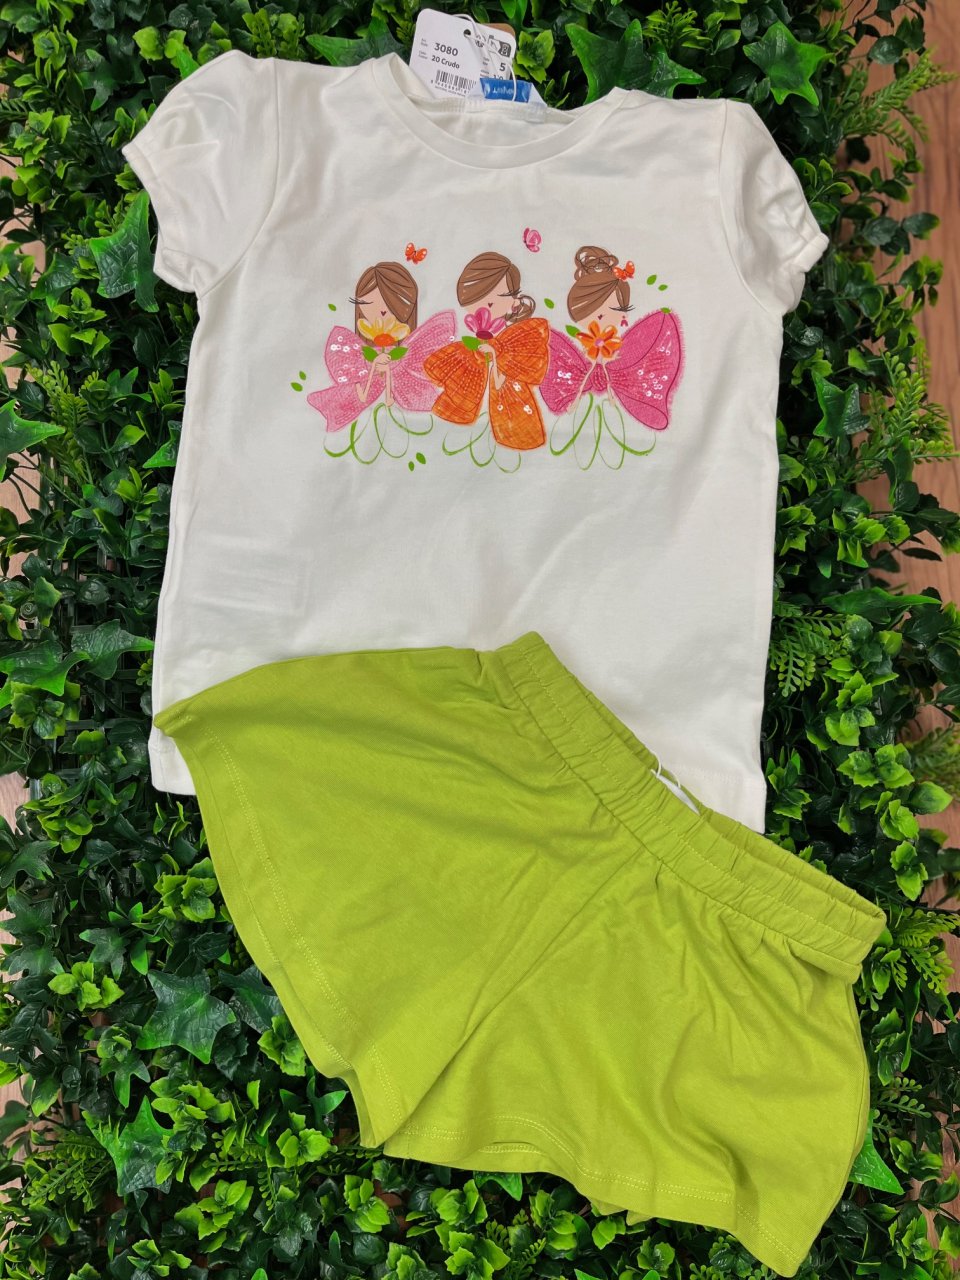 MAYORAL 3080/3257 OFF WHITE TEE PRINTED AND SEQUIN DETAIL  WITH KIWI GREEN SOFT SHORTS 2 PCE 4,5,7,8,&9YRS ONLY